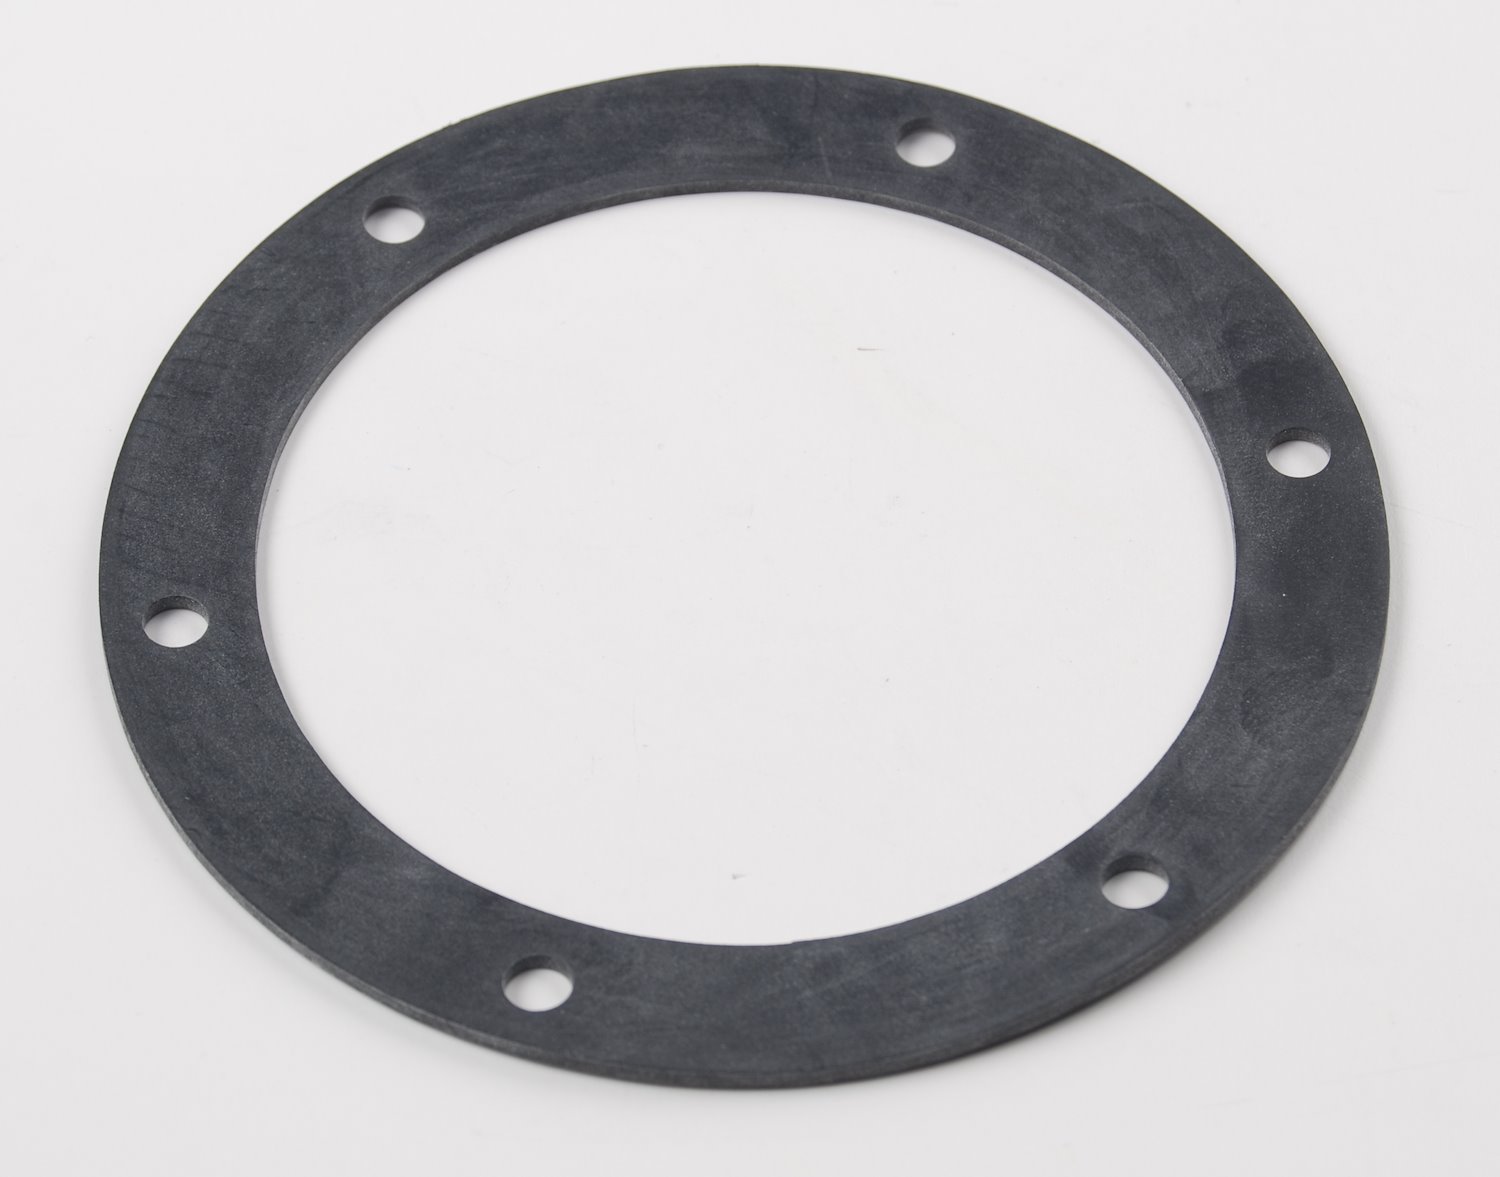 6-Bolt Mounting Ring Gasket For 1 to 3 Gallon Fuel Cells